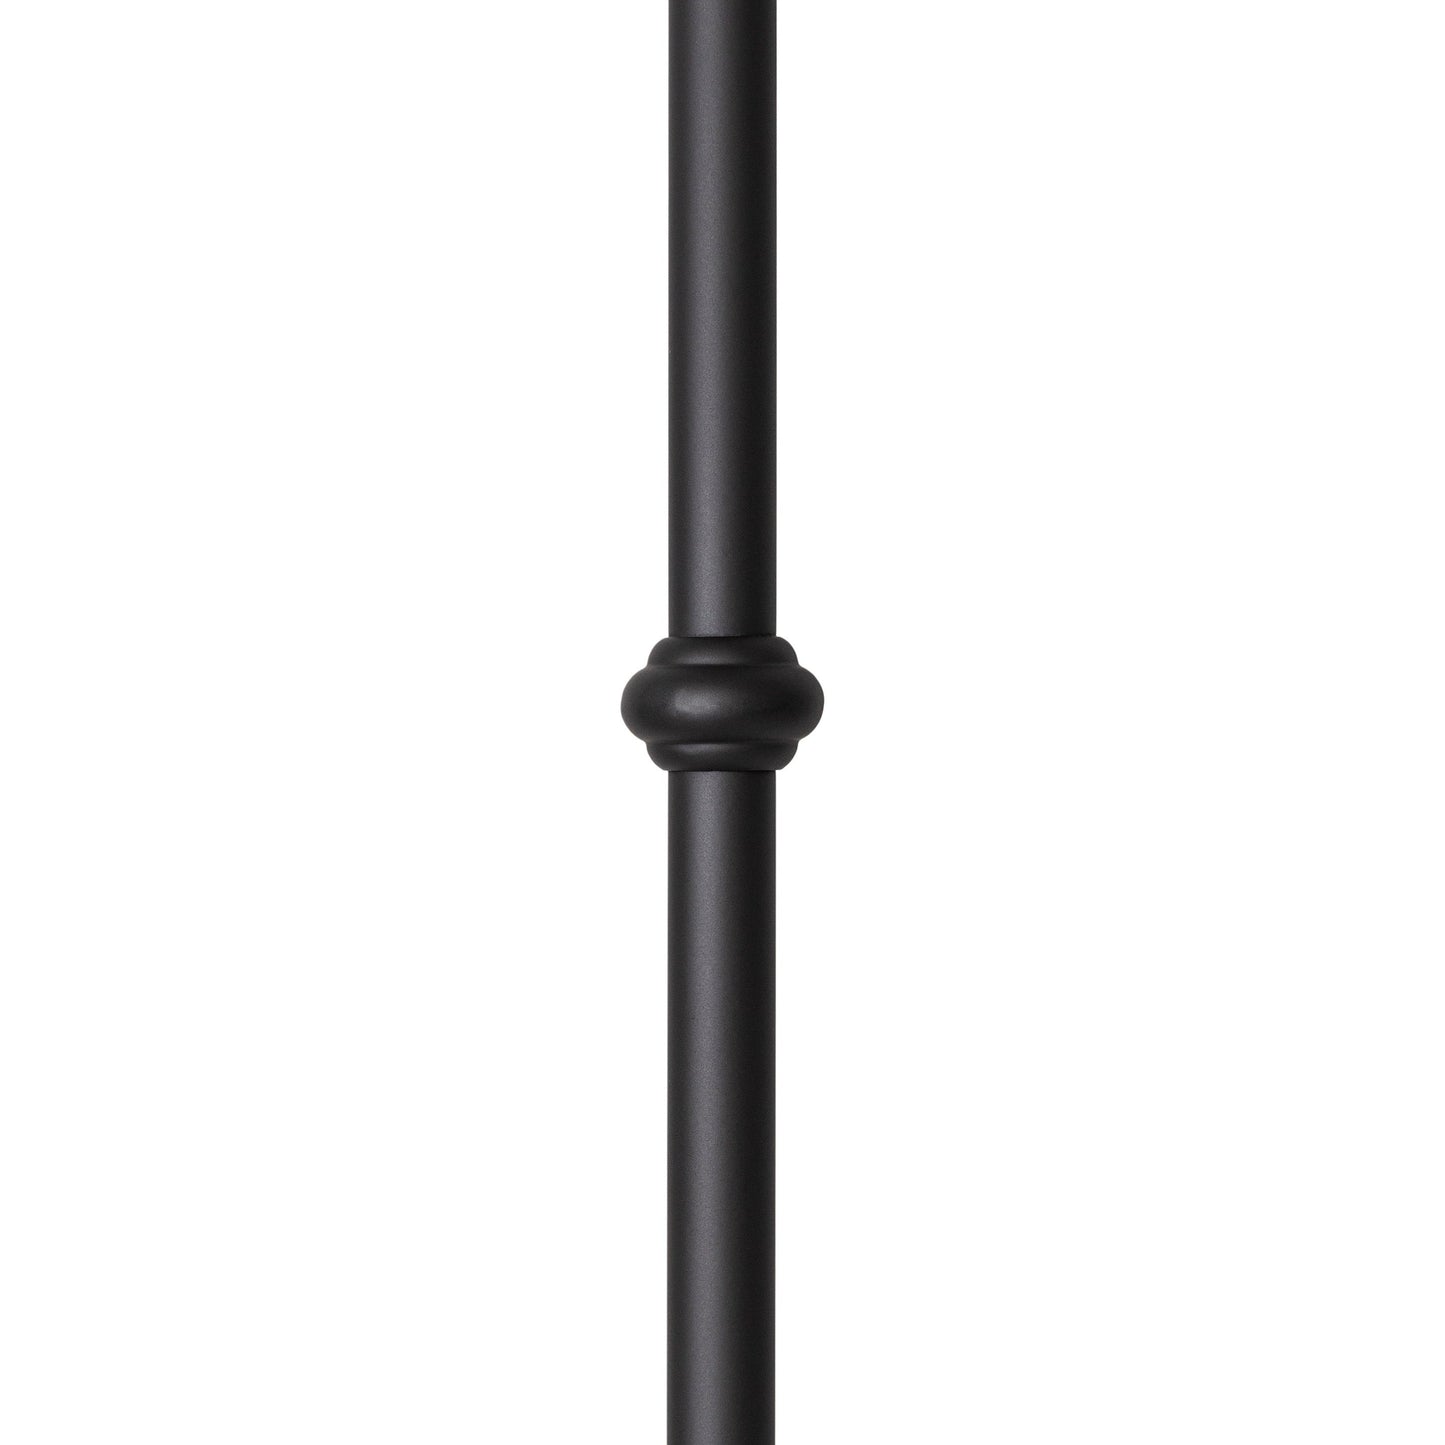 2GR20 - Iron Baluster - Round - Double Collar - 5/8"